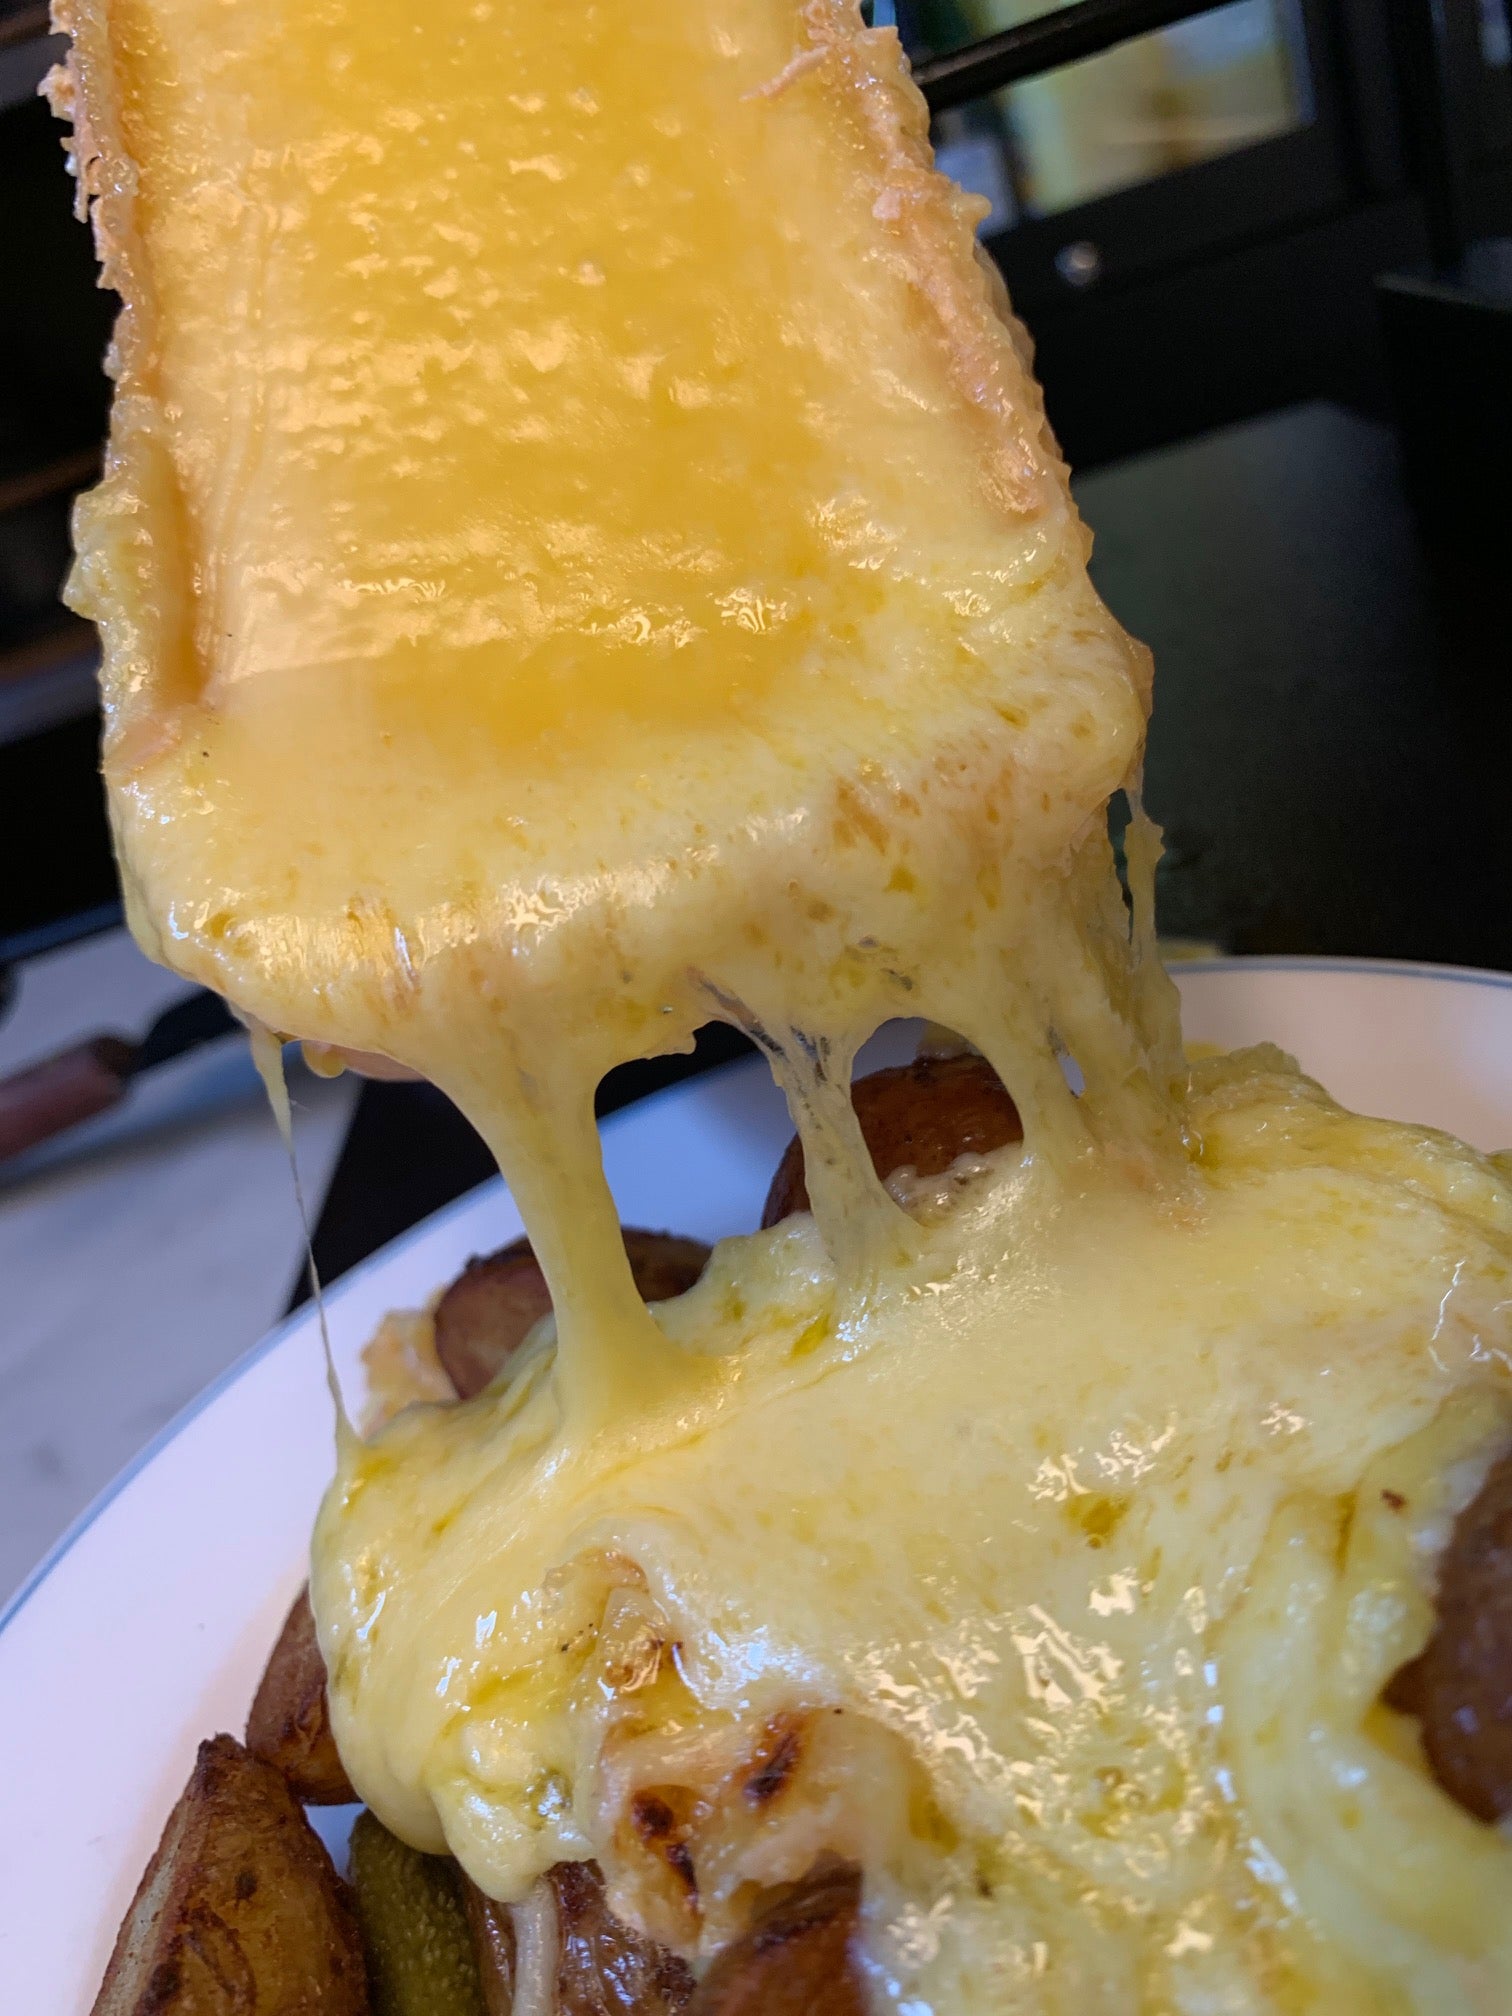 Bottomless Raclette cheese tasting